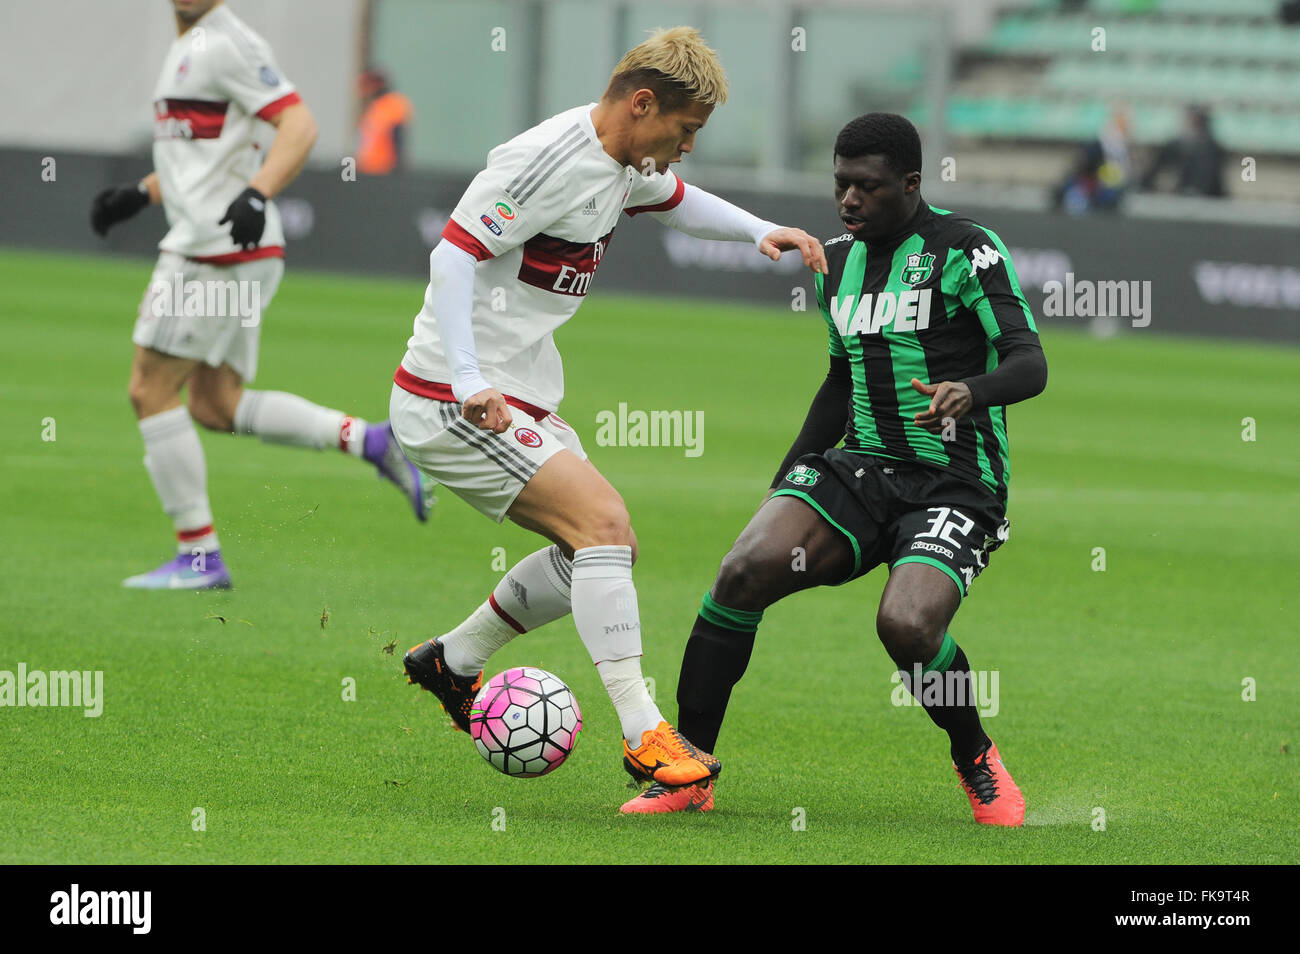 Reggio Emilia, Italy. 06th Mar, 2016. Keisuke Honda Milan's forward and national team of Japan and Joseph Alfred Duncan Sassuolo's midfielder fight for the ball during the Serie A football match between Sassuolo and AC Milan at Mapei Stadium in Reggio Emilia. US Sassuolo Calcio vs AC Milan Serie A football championship 2015/2016. US Sassuolo Calcio wins 2 - 0 over AC Milan. Joseph Alfred Duncan and Nicola Domenico Sansone are the scorers. Credit:  Massimo Morelli/Pacific Press/Alamy Live News Stock Photo